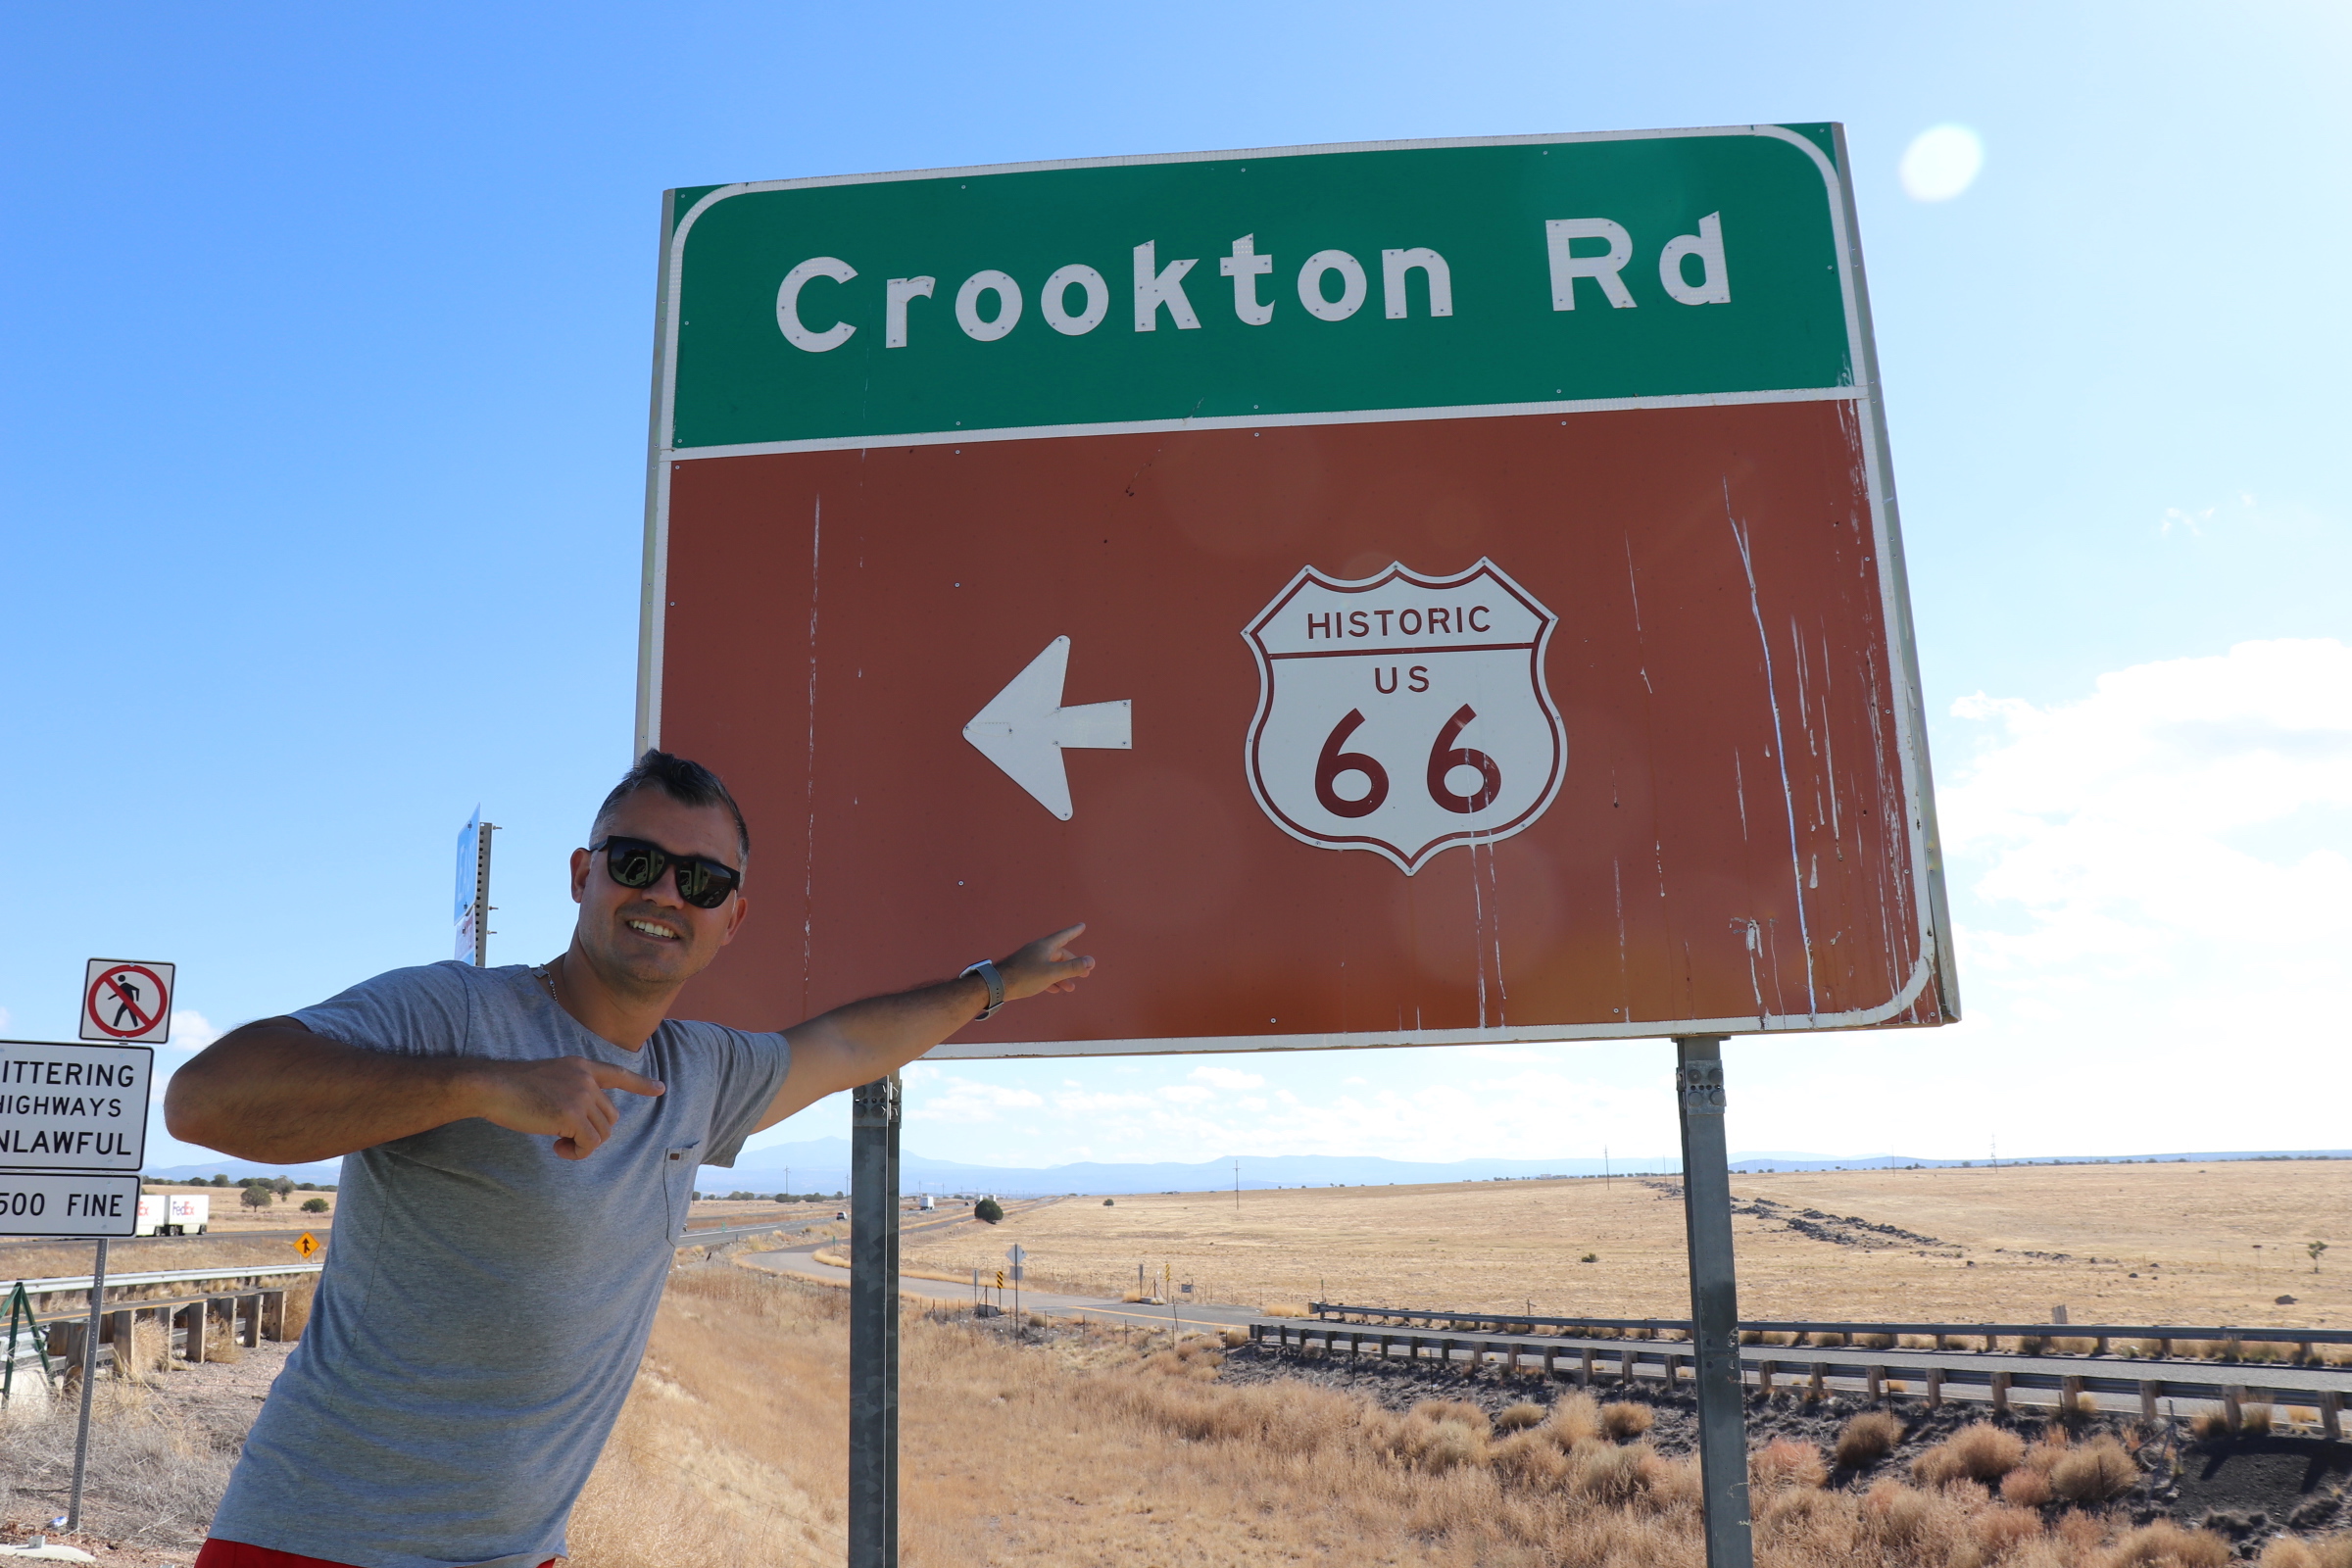 JP excited to take the Historic Route 66